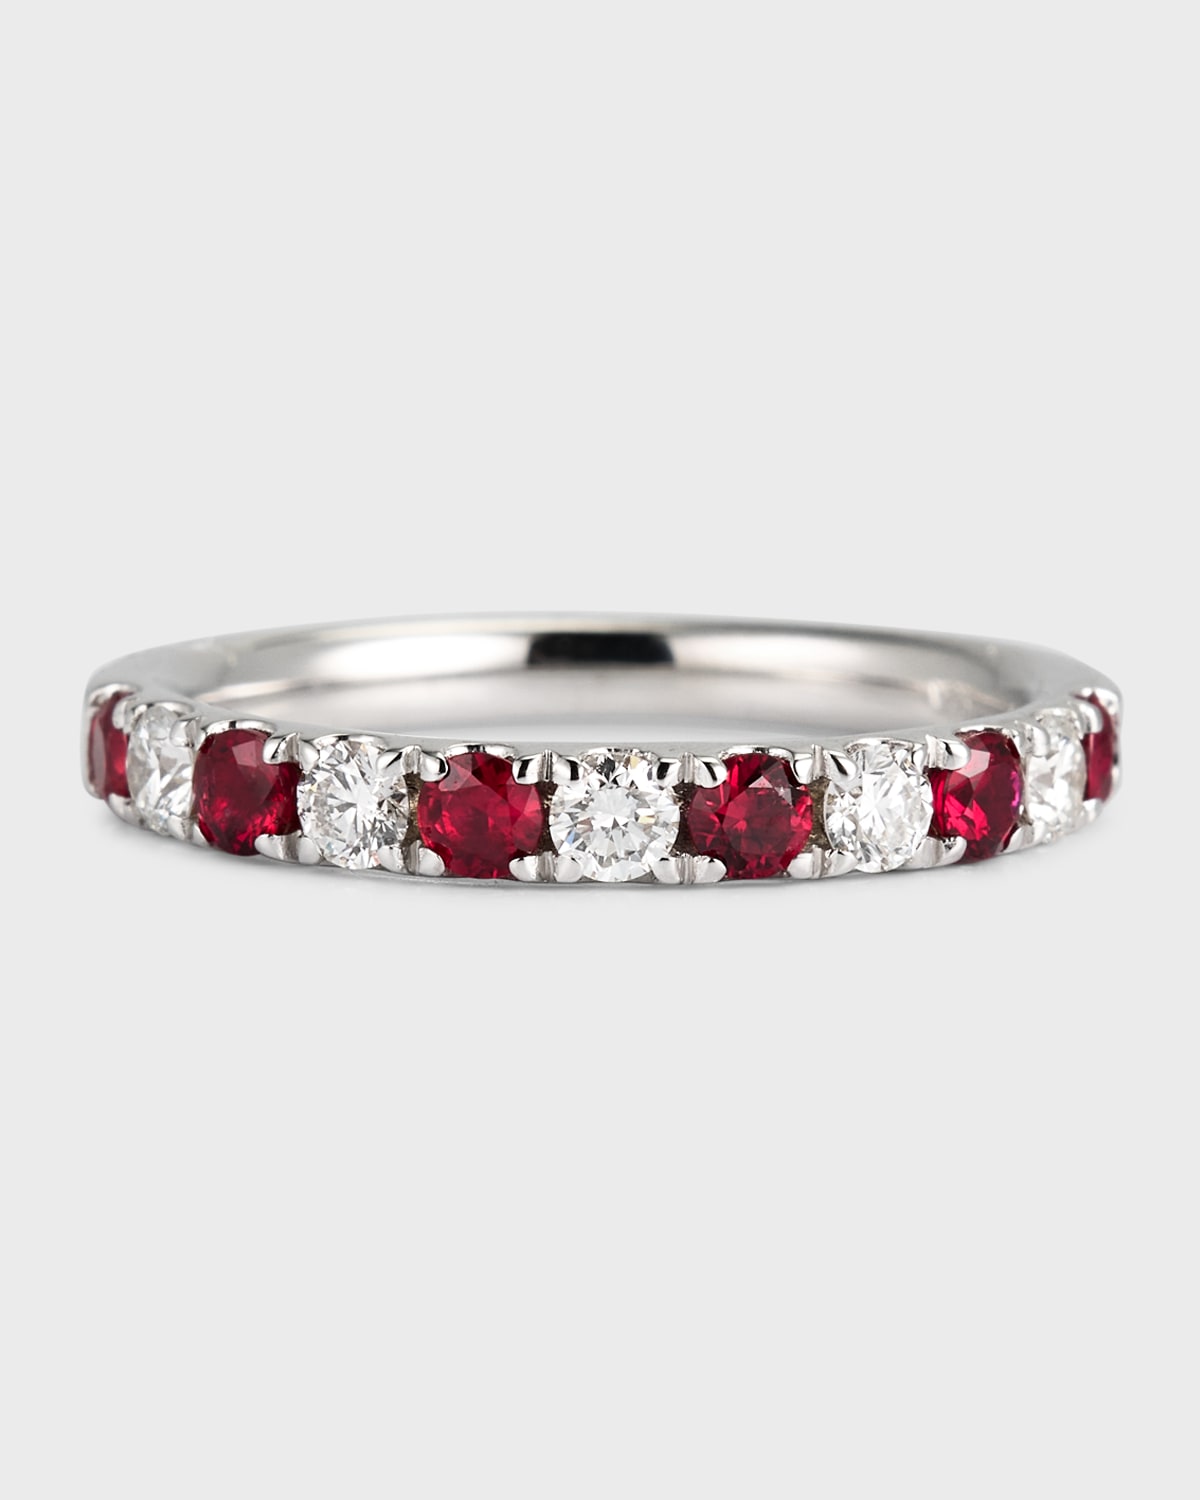 18K White Gold Ring with 2.5mm Alternating Rubies and Diamonds, Size 6